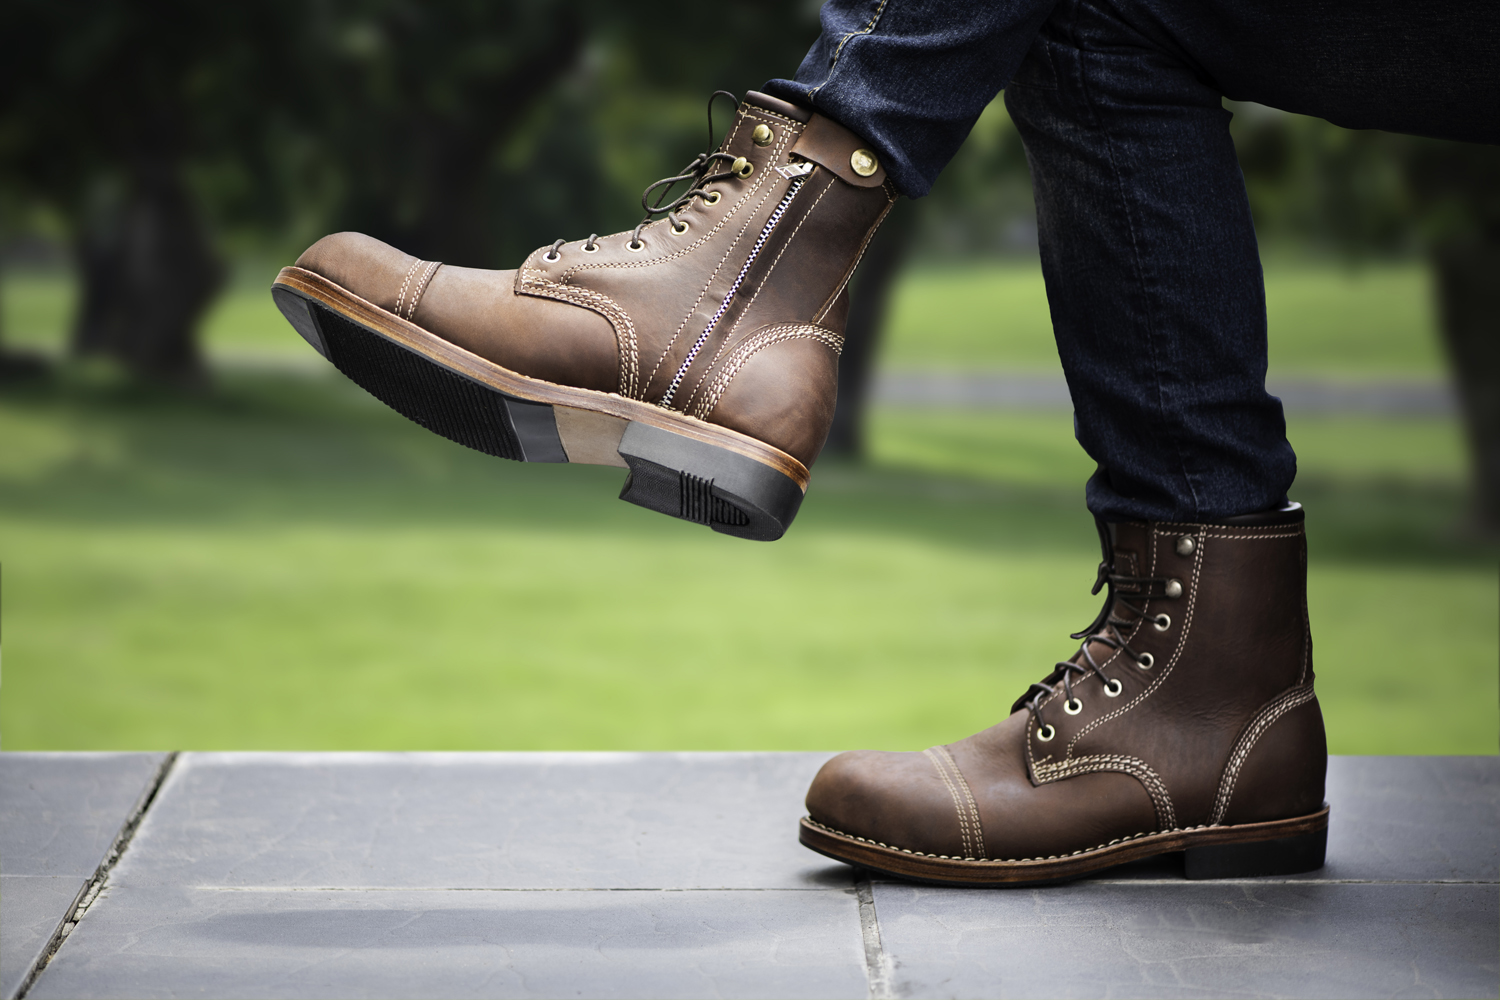 Tranquility stride Sunday The Best Boots for Men Who Care About Style in 2022 | The Manual